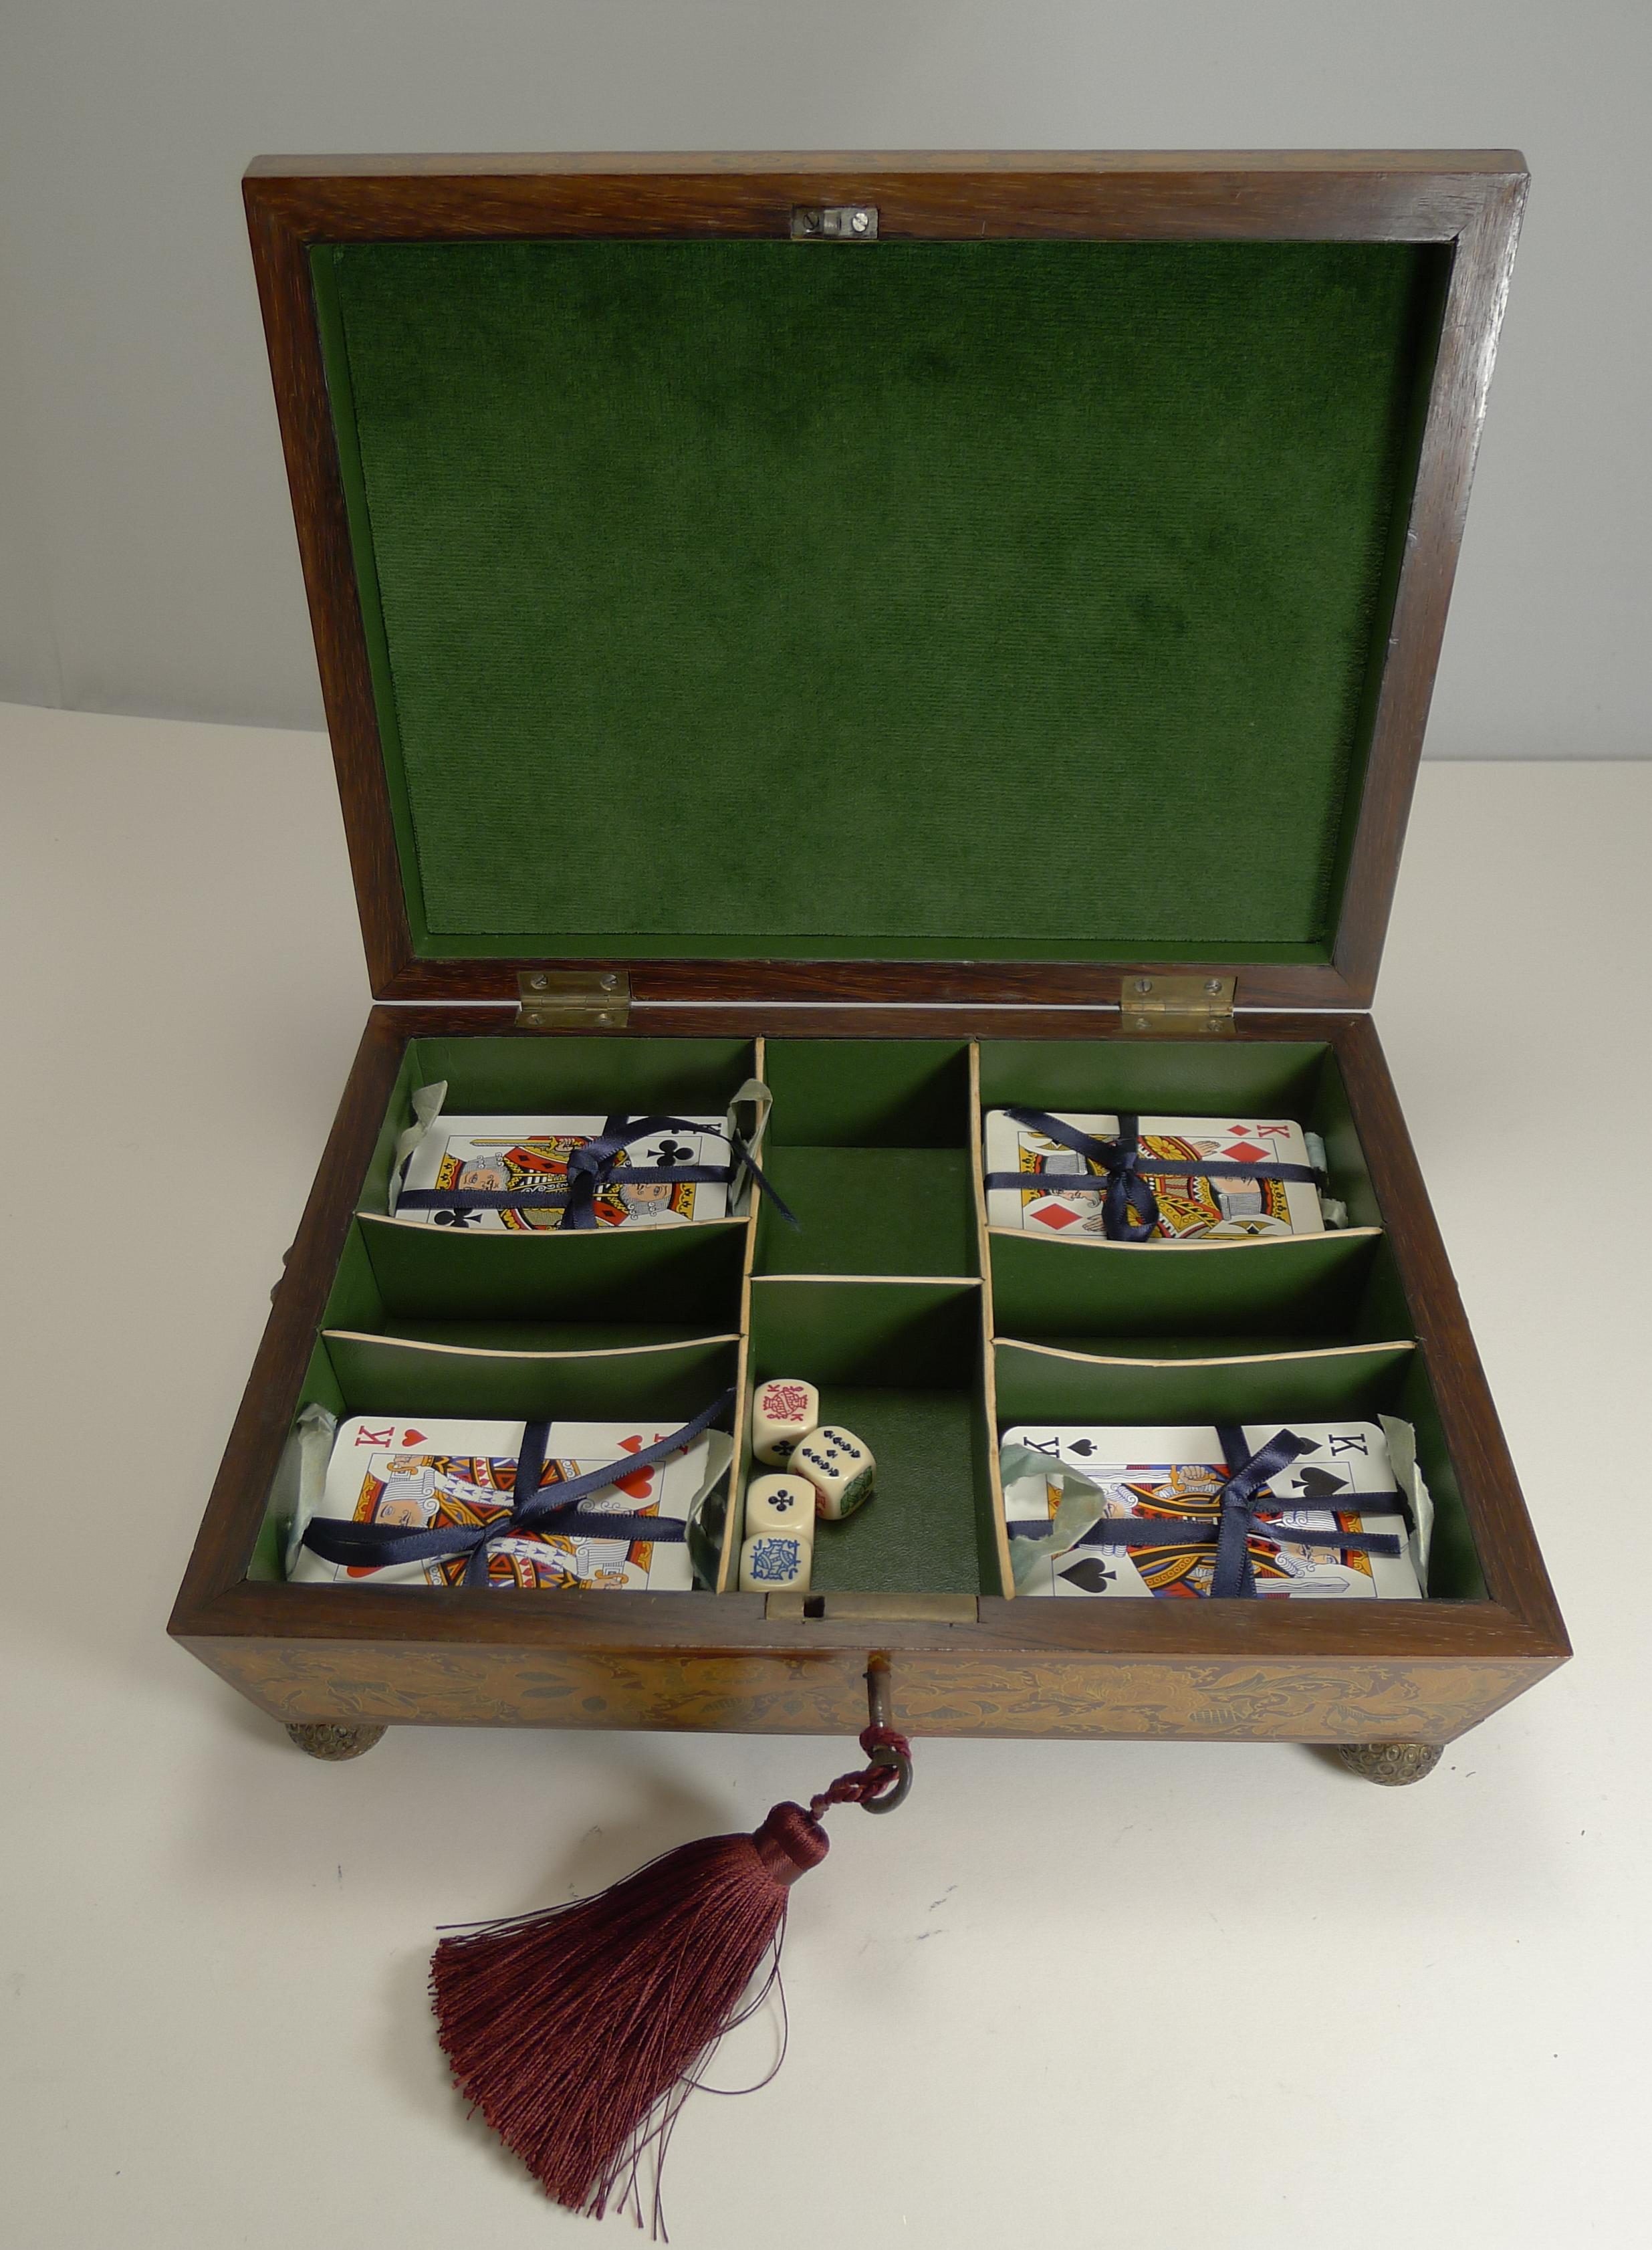 Antique English Regency Penwork Games or Playing Card Box, circa 1820 For Sale 3